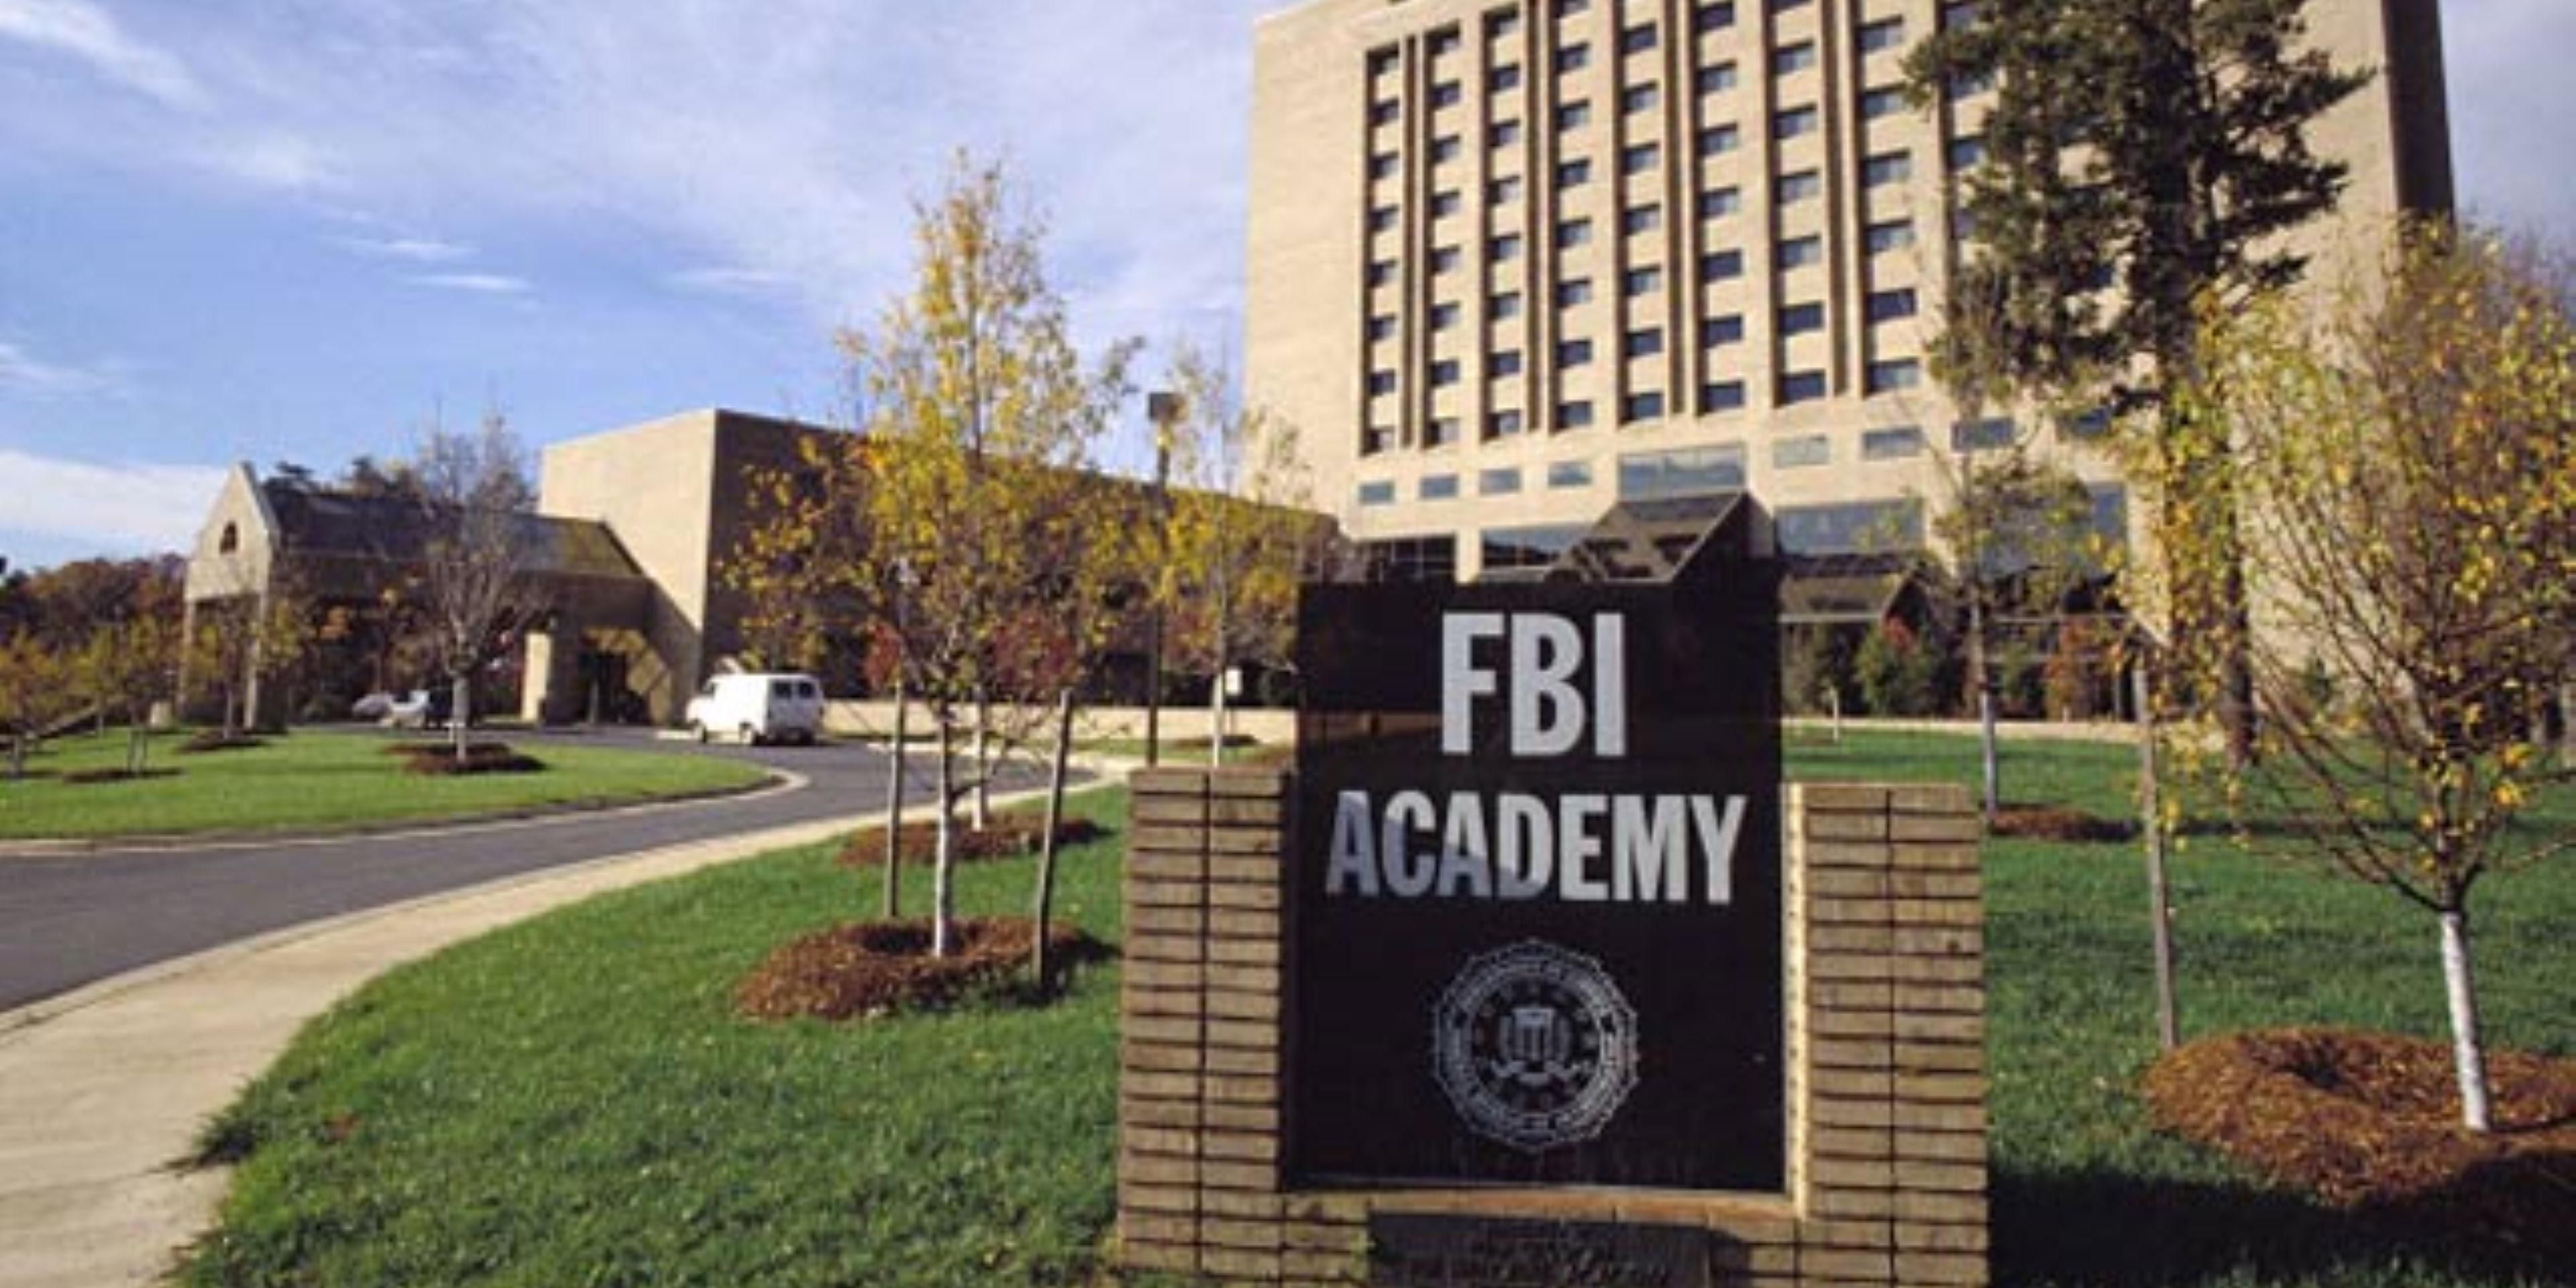 The FBI Academy is just 8 miles away from our property. If you are in the area for government travel, our hotel is your best option!